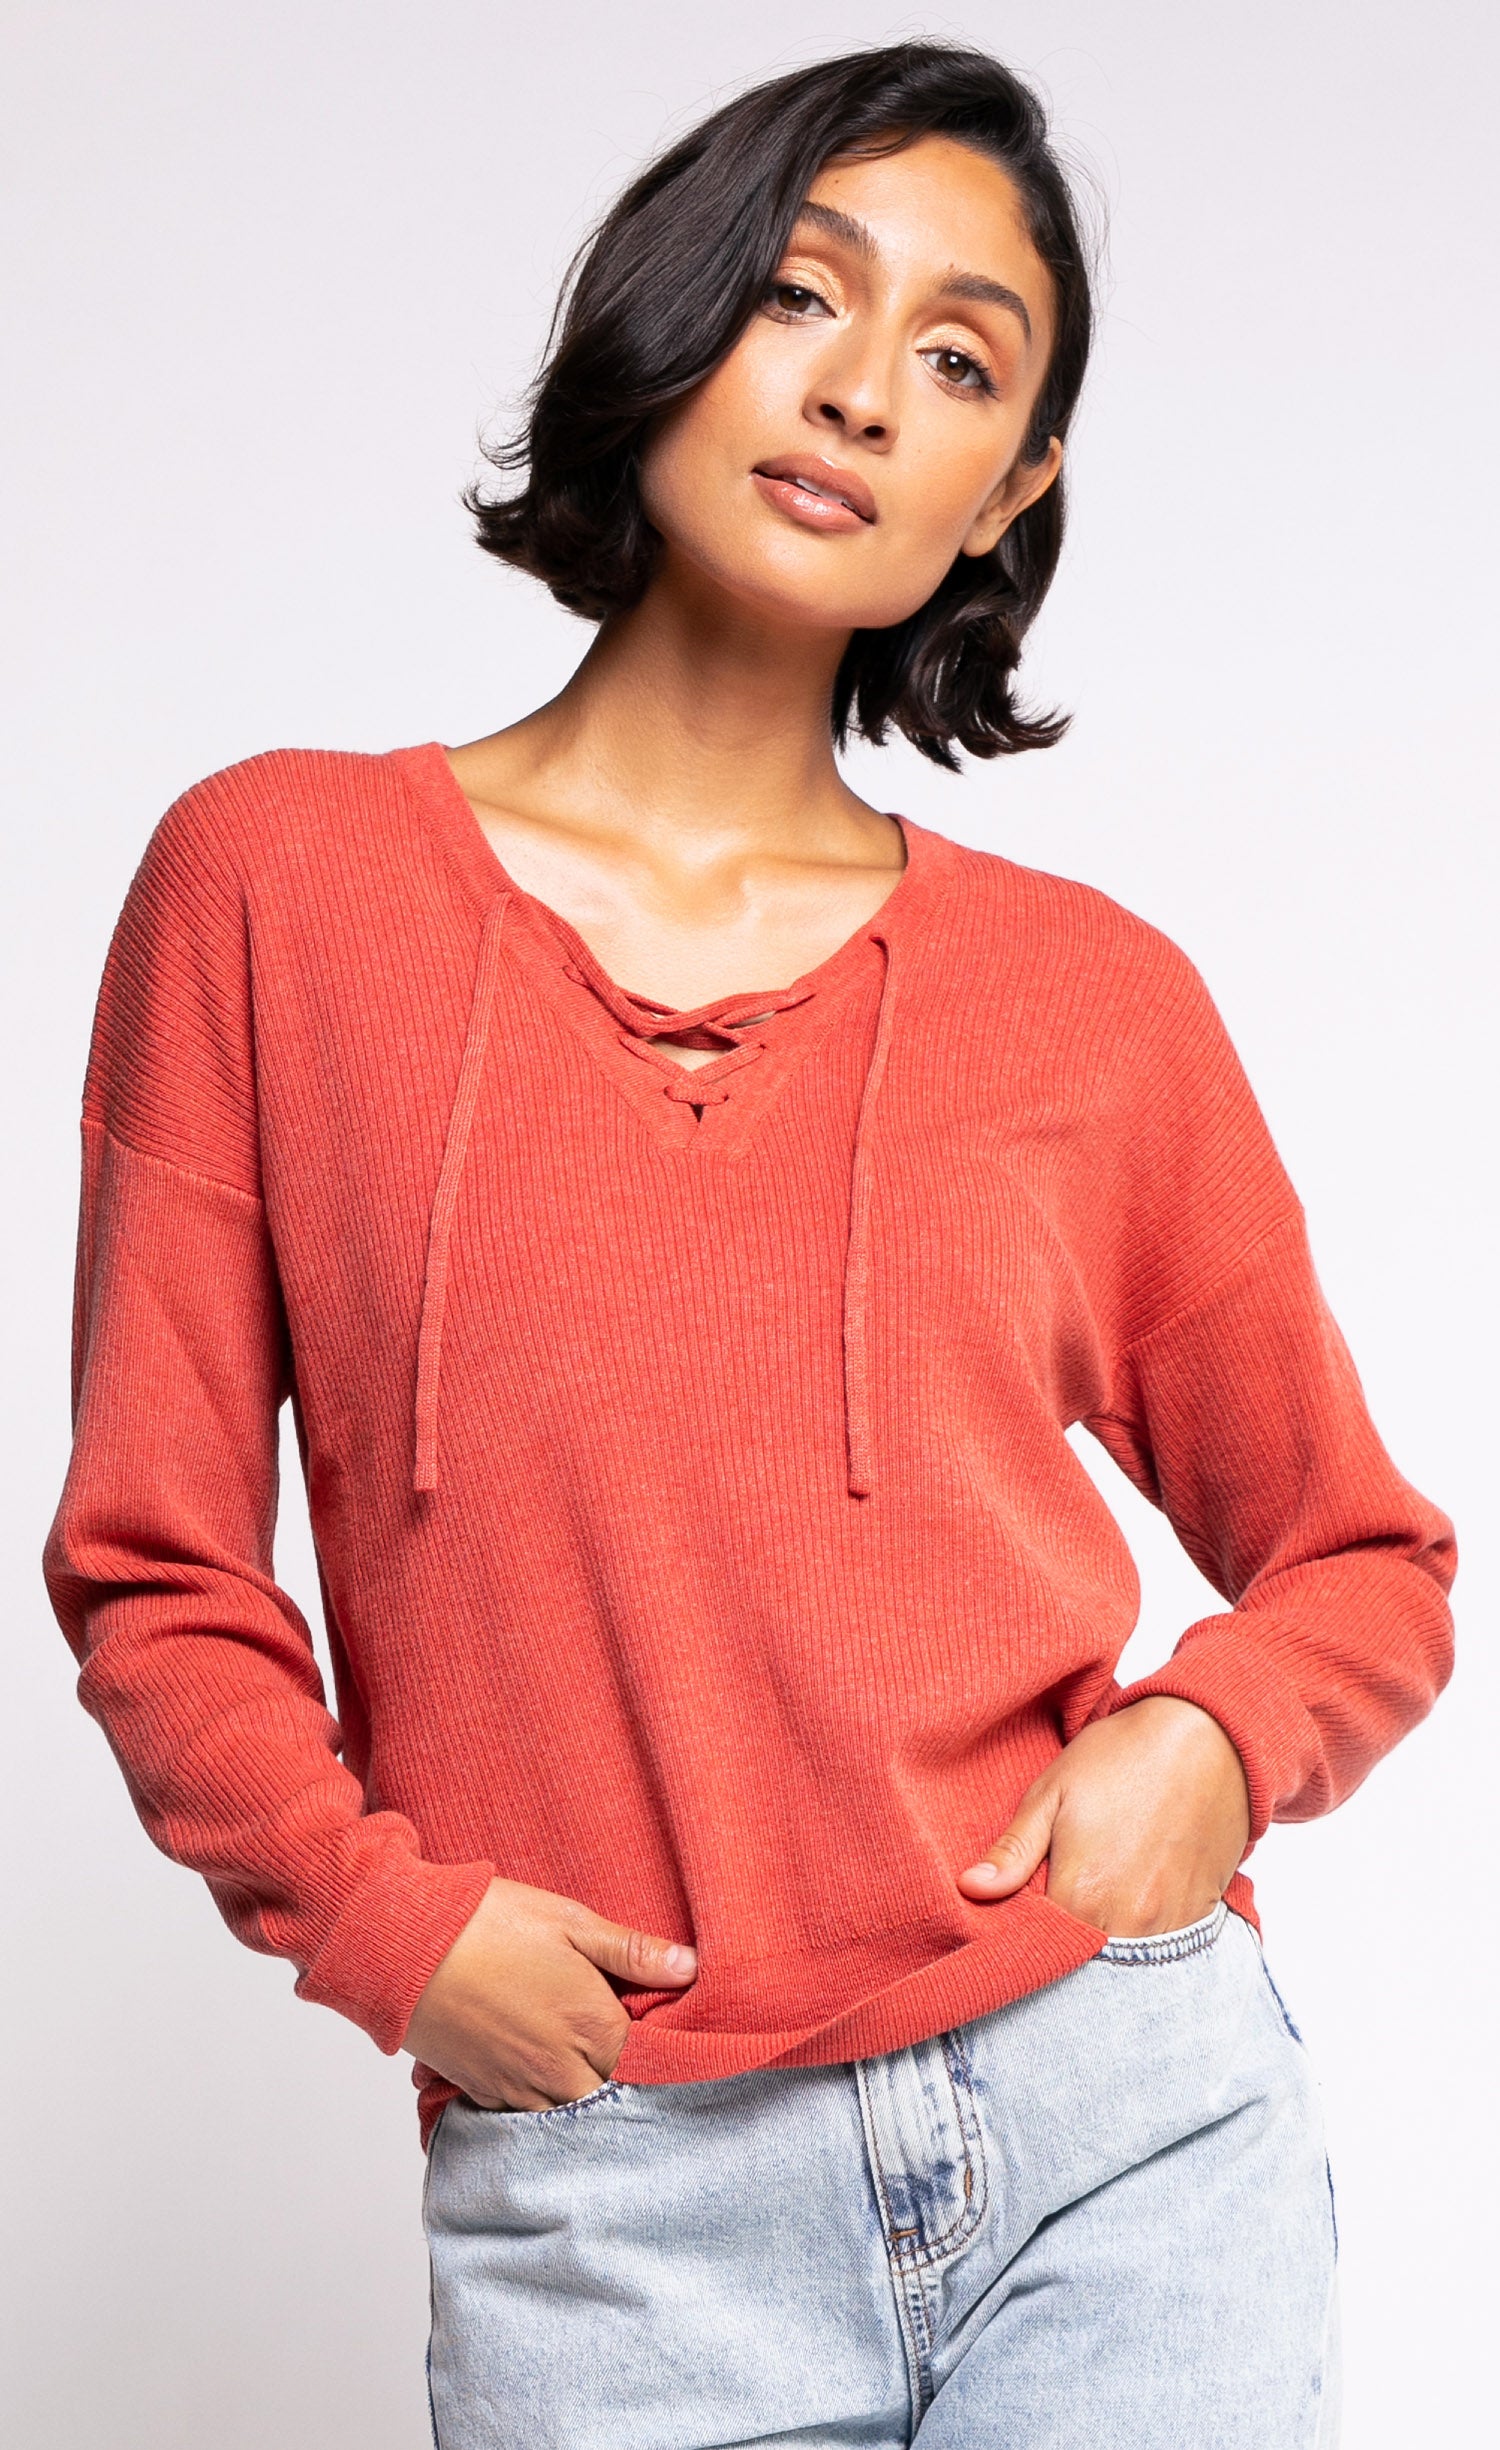 Tie The Knot Sweater - Pink Martini Collection